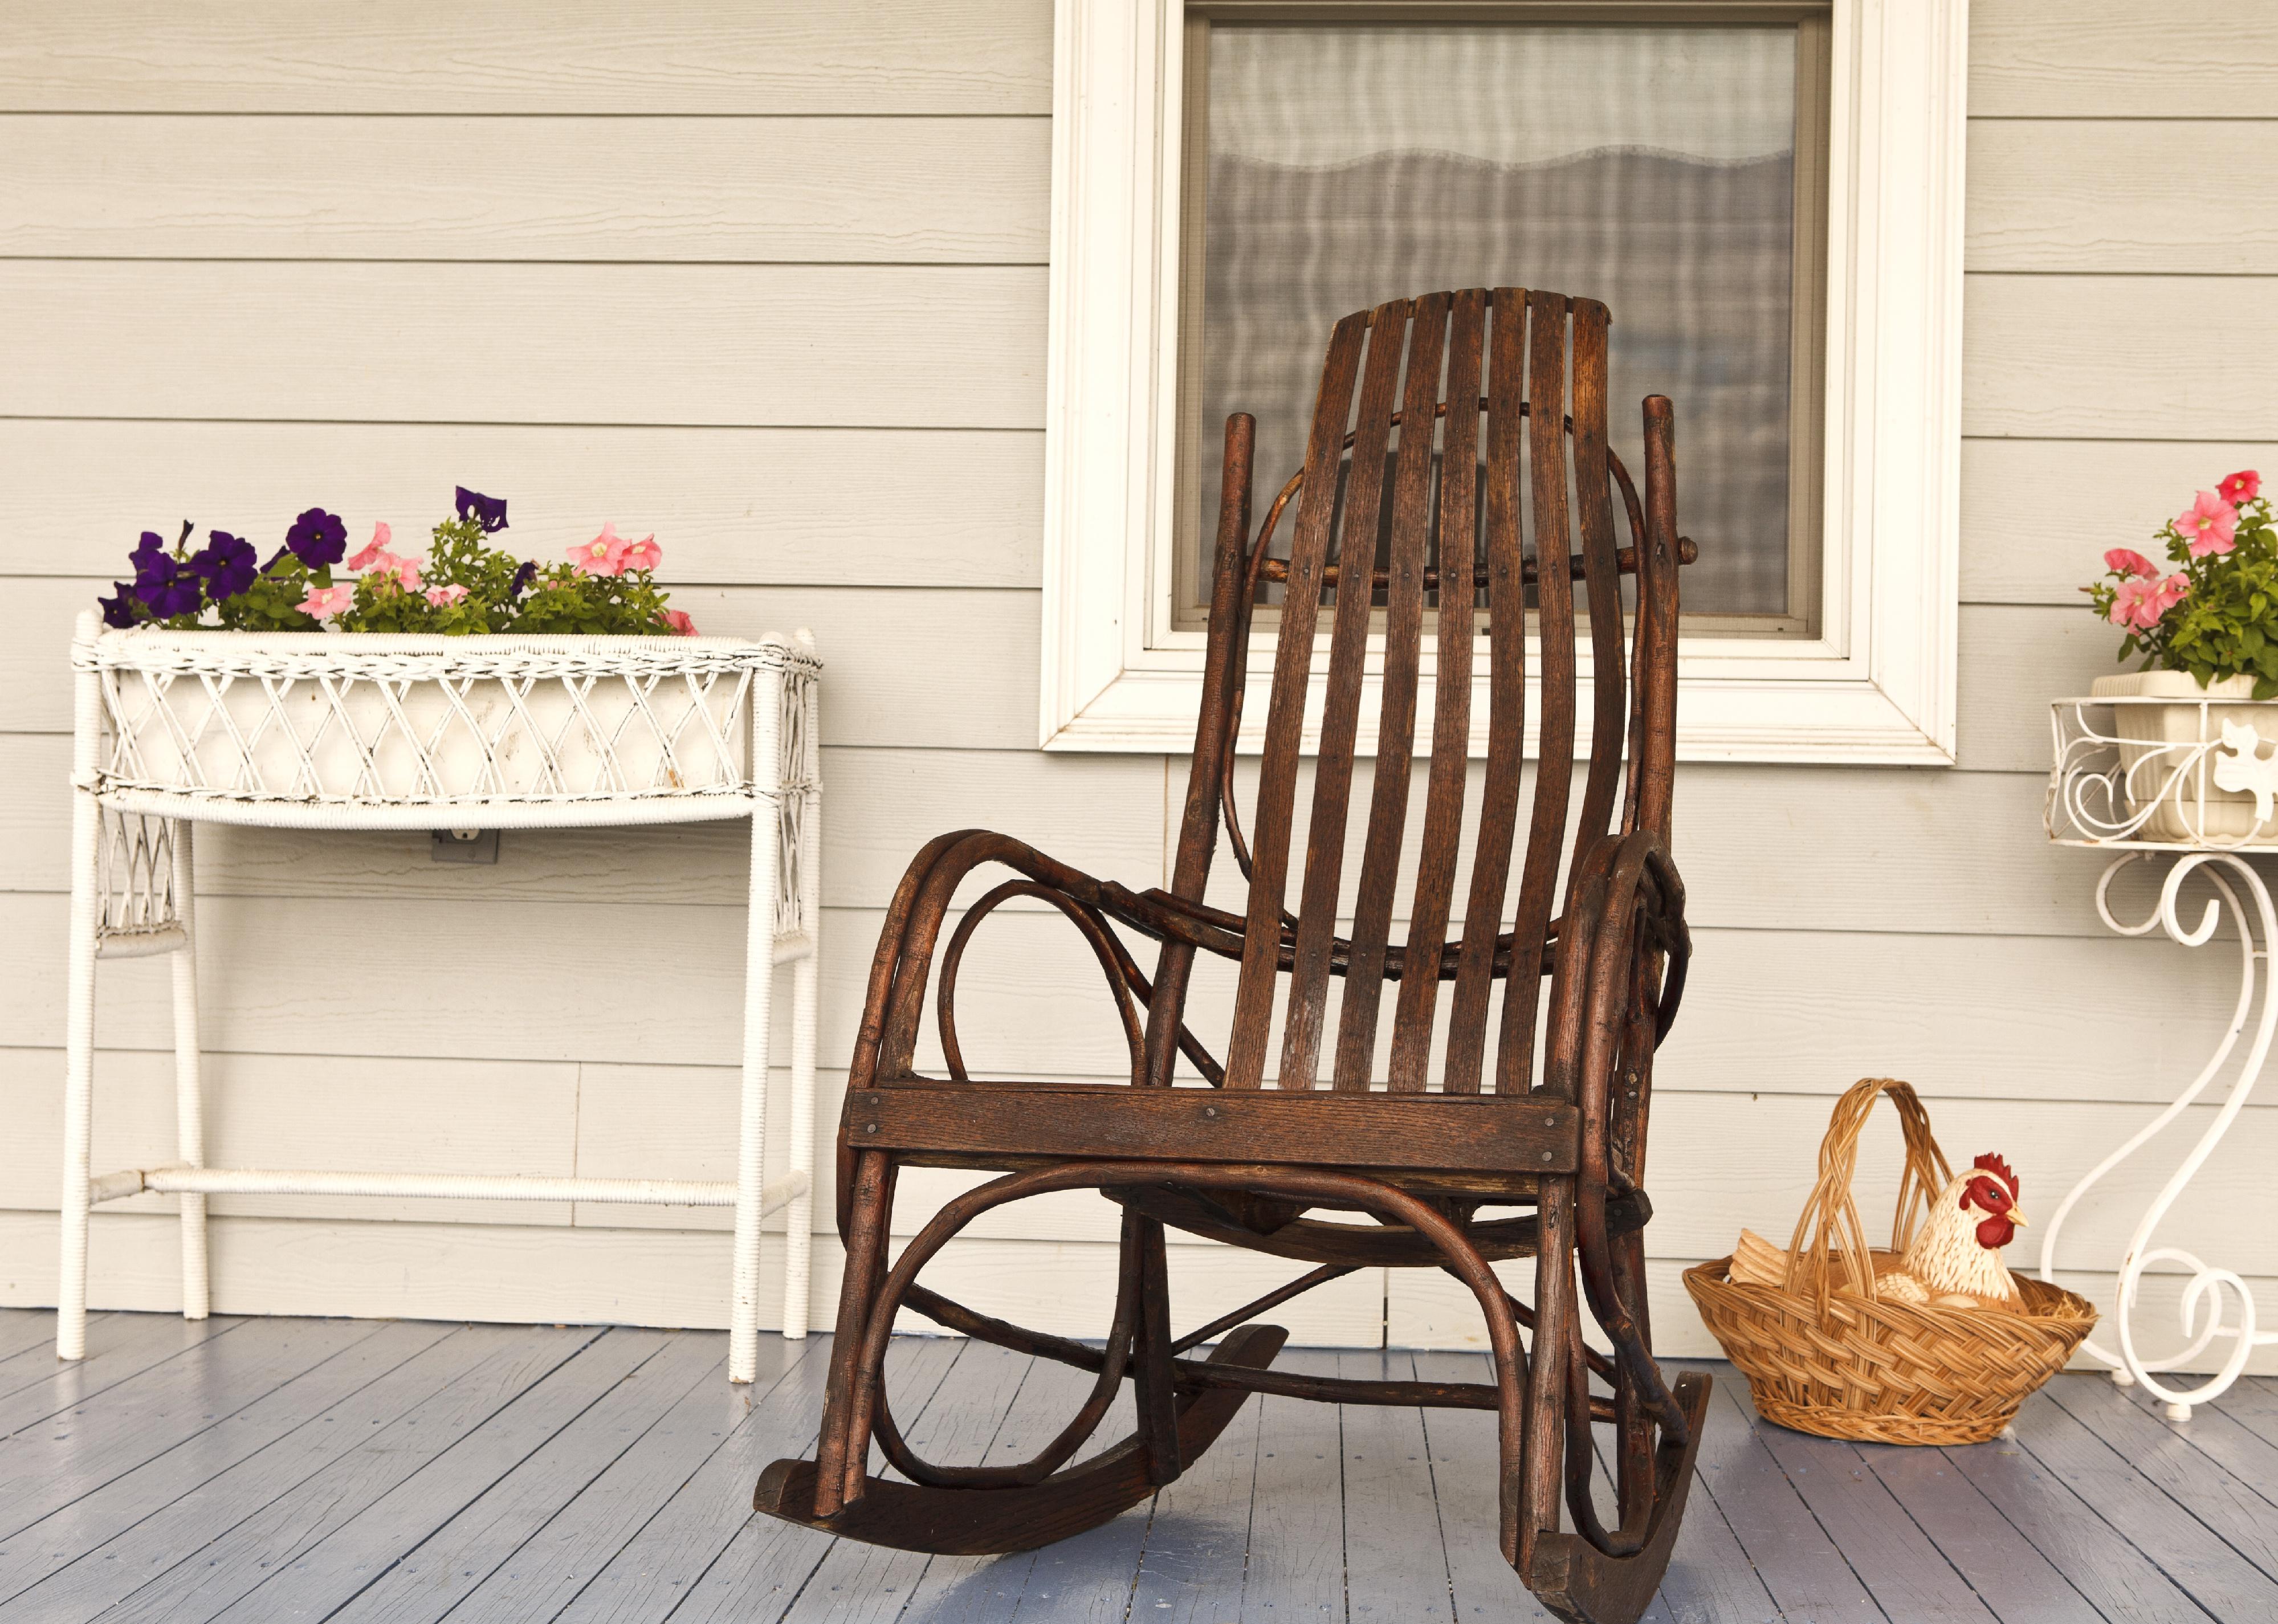 A front porch with a rocking chair.